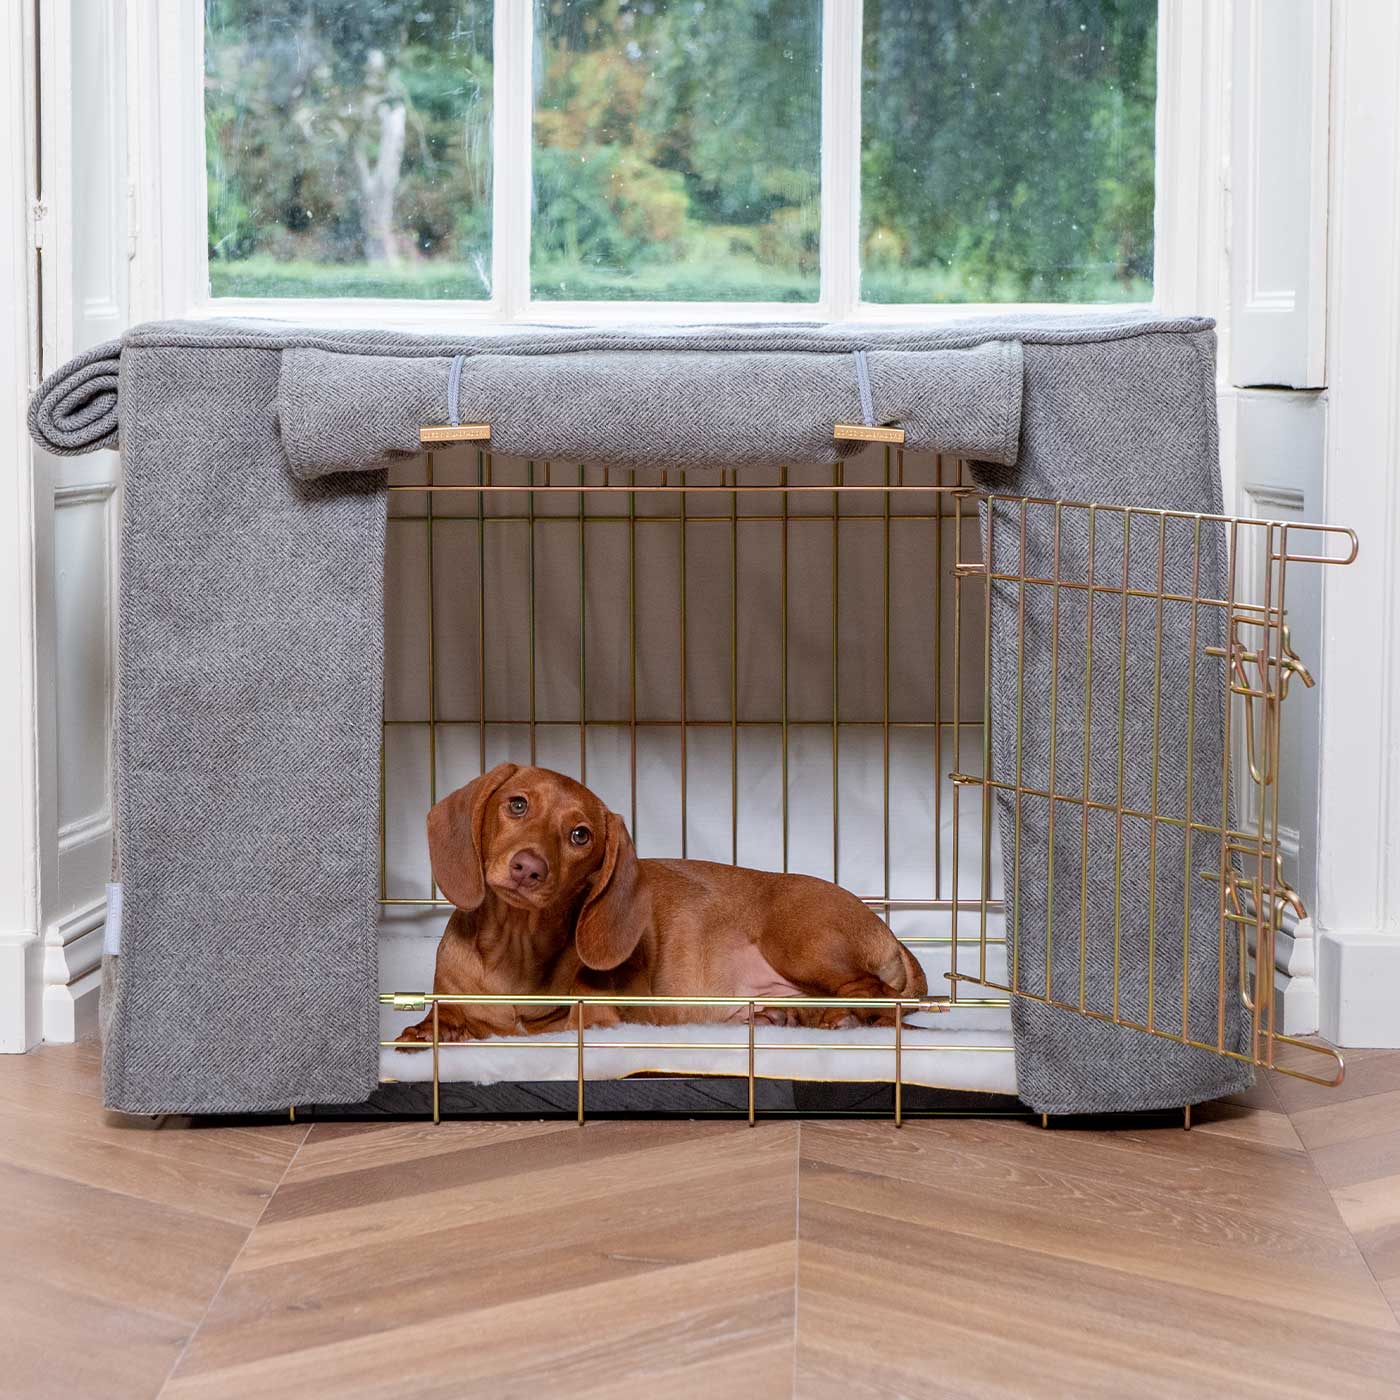 Luxury Dog Cage Cover, Pewter Herringbone Tweed Cage Cover The Perfect Dog Cage Accessory, Available To Personalize Now at Lords & Labradors US